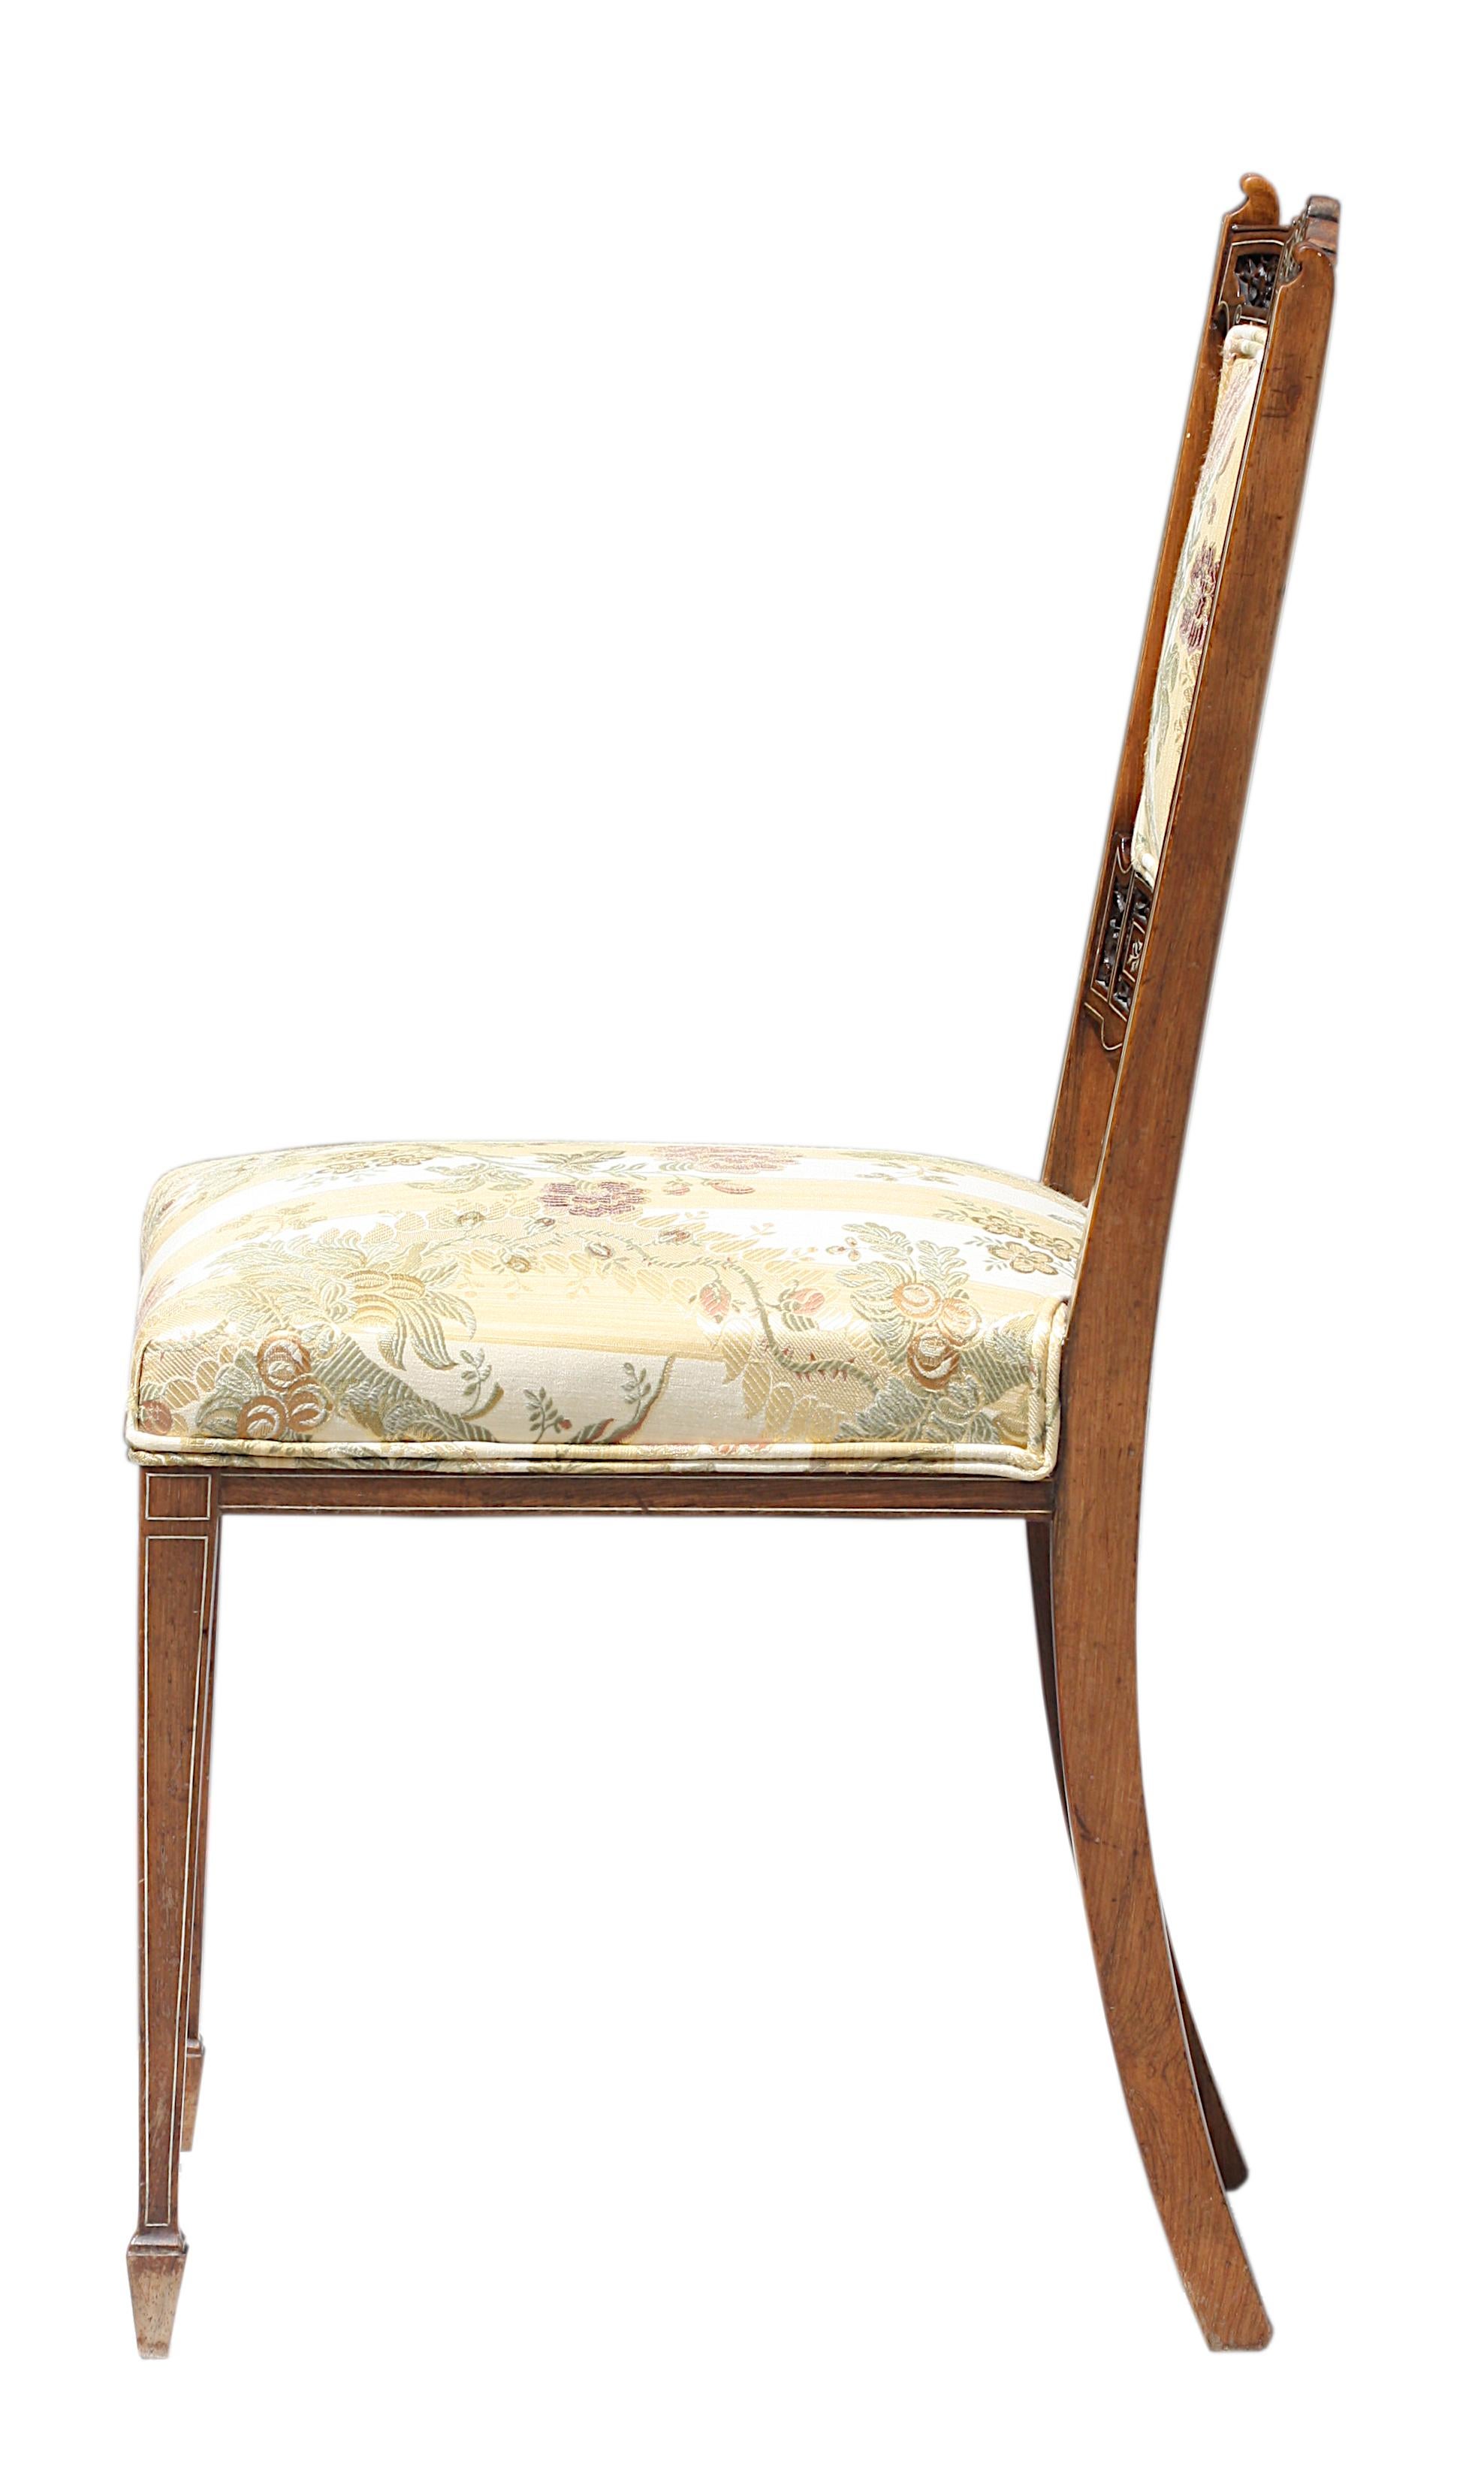 
Italian Bone and Ebony Inlaid Rosewood Side Chair
Circa 1870. The back with a pierced and inlaid crest above a central padded back, the upholstered seat on inlaid square tapering legs. 
Height 35 in. (88.9 cm.), Width 16 in. (40.64 cm.), Depth 17.5